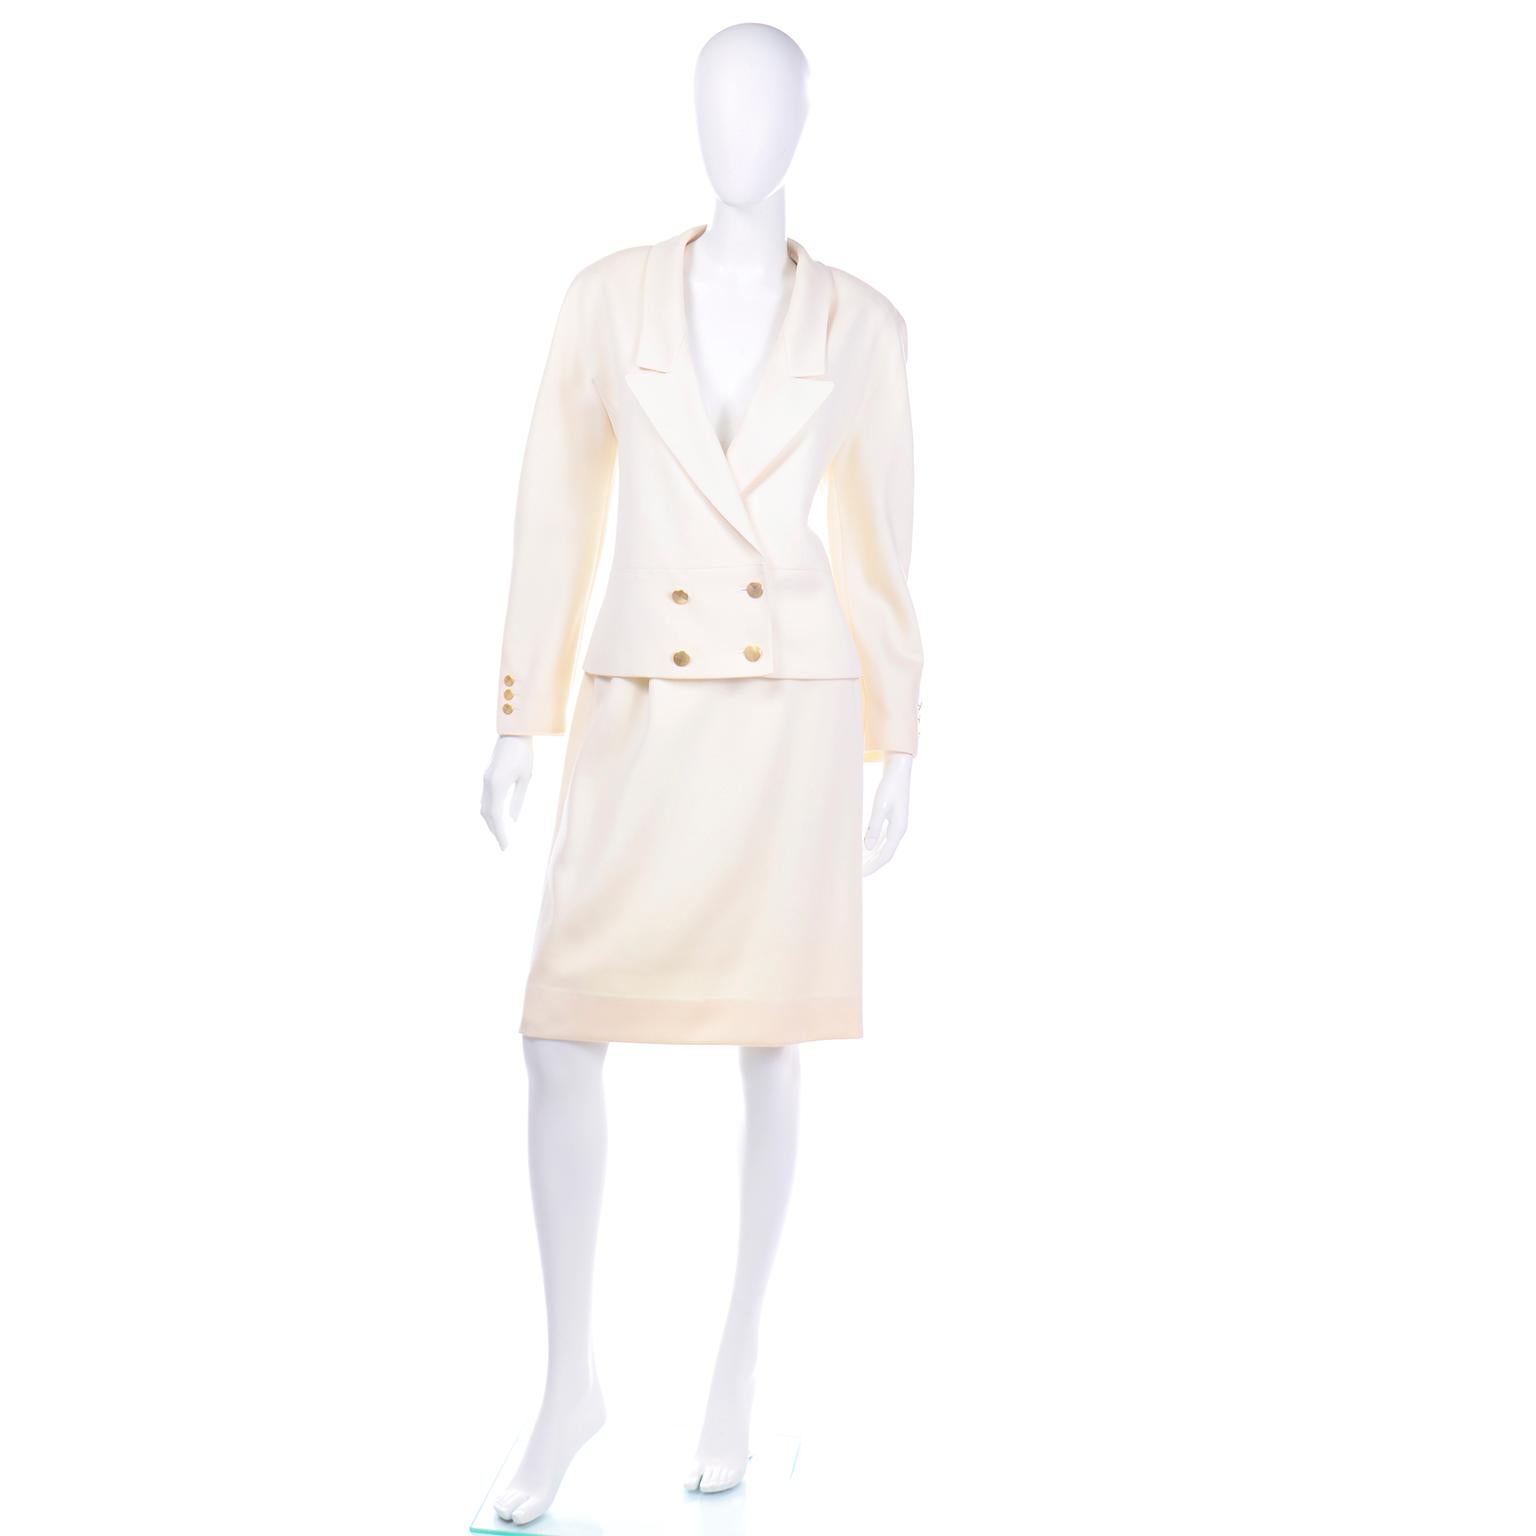 This elegant Louis Féraud cream wool skirt suit is so beautifully made and it comes with a pencil skirt and a double breasted blazer. The jacket has gold tone textured buttons on the cuffs of the sleeves, the double breasted closure and the back of